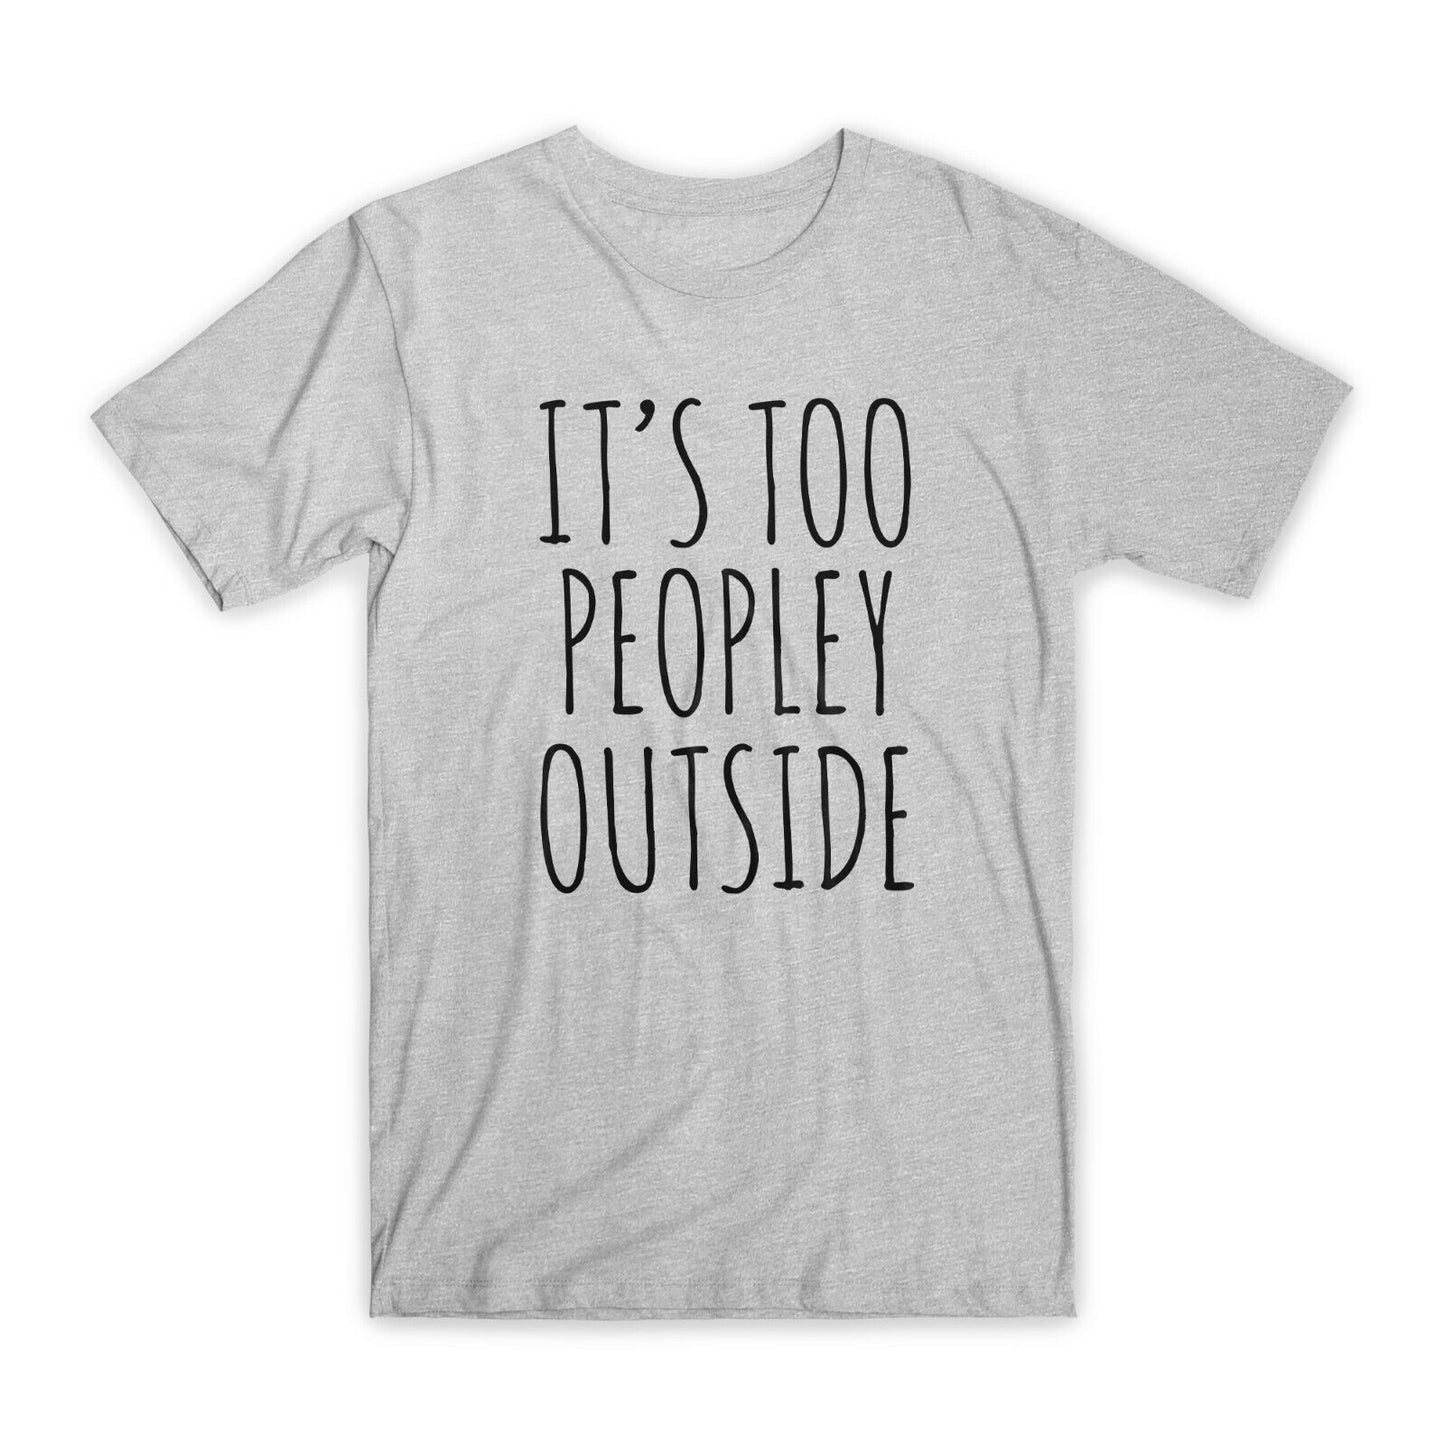 It's Too Peopley Outside T-Shirt Premium Soft Cotton Funny Tees Novelty Gift NEW